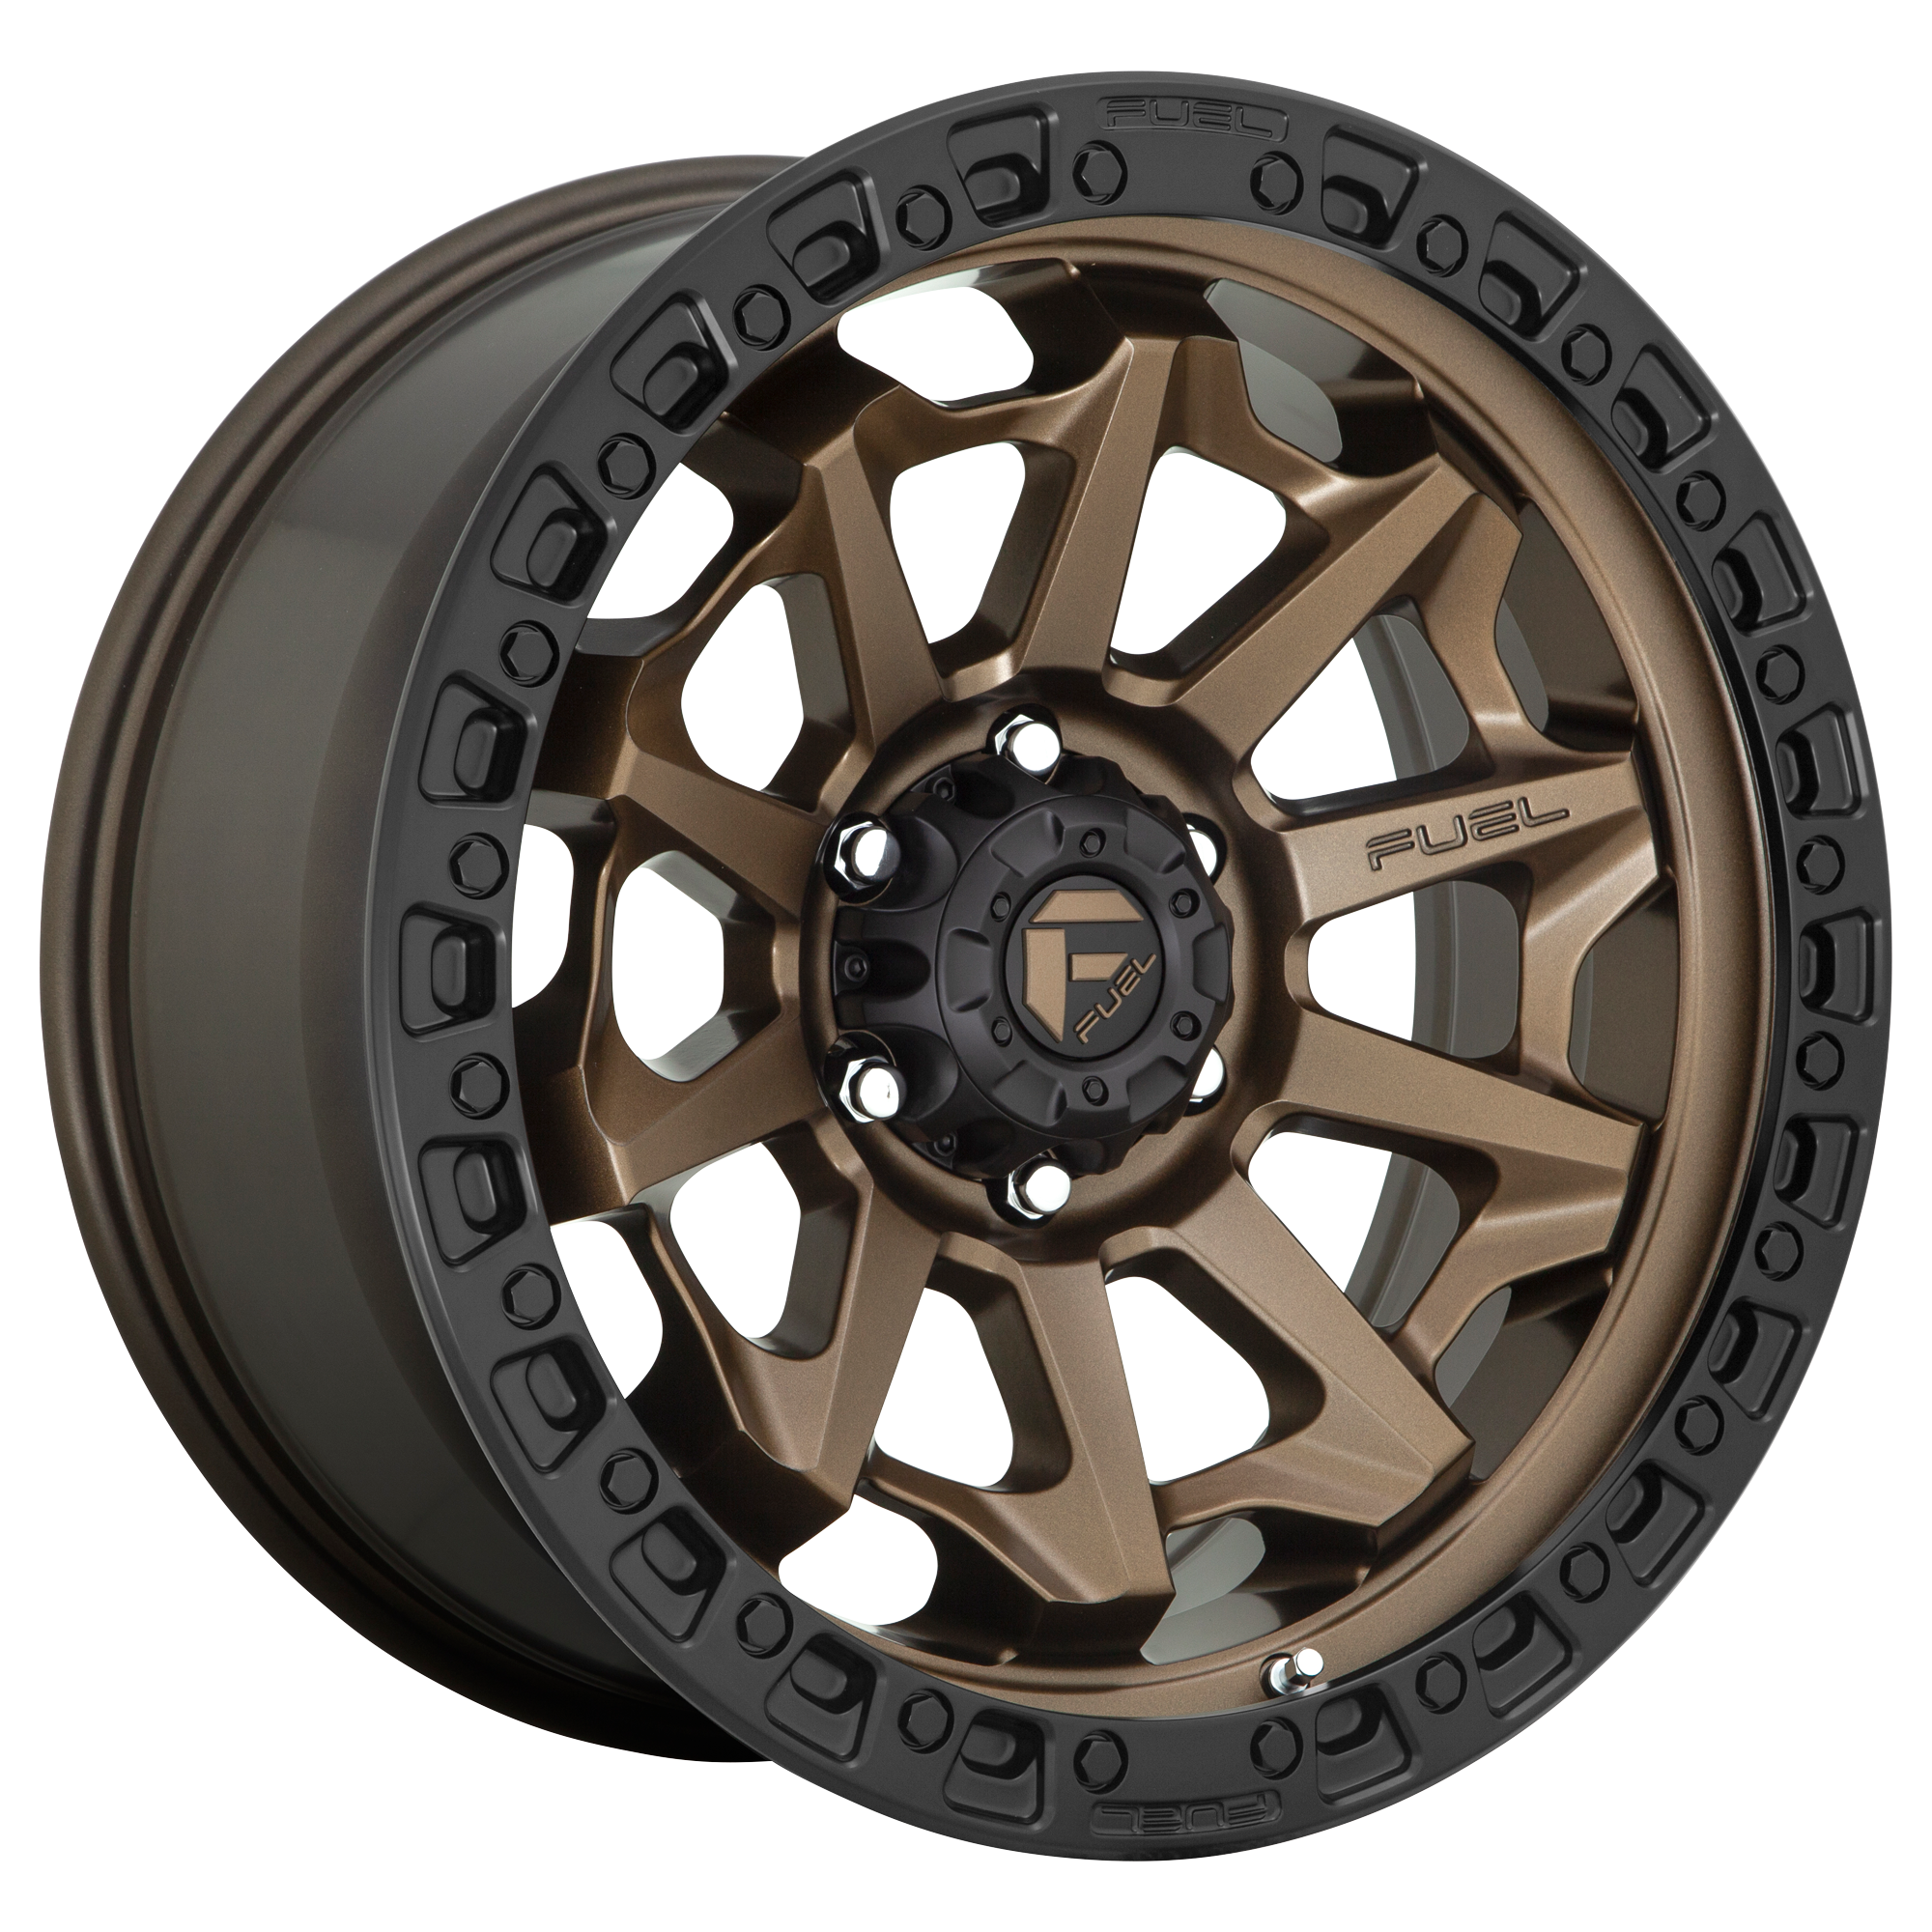 COVERT 17x9 6x139.70 MATTE BRONZE BLACK BEAD RING (1 mm) - Tires and Engine Performance